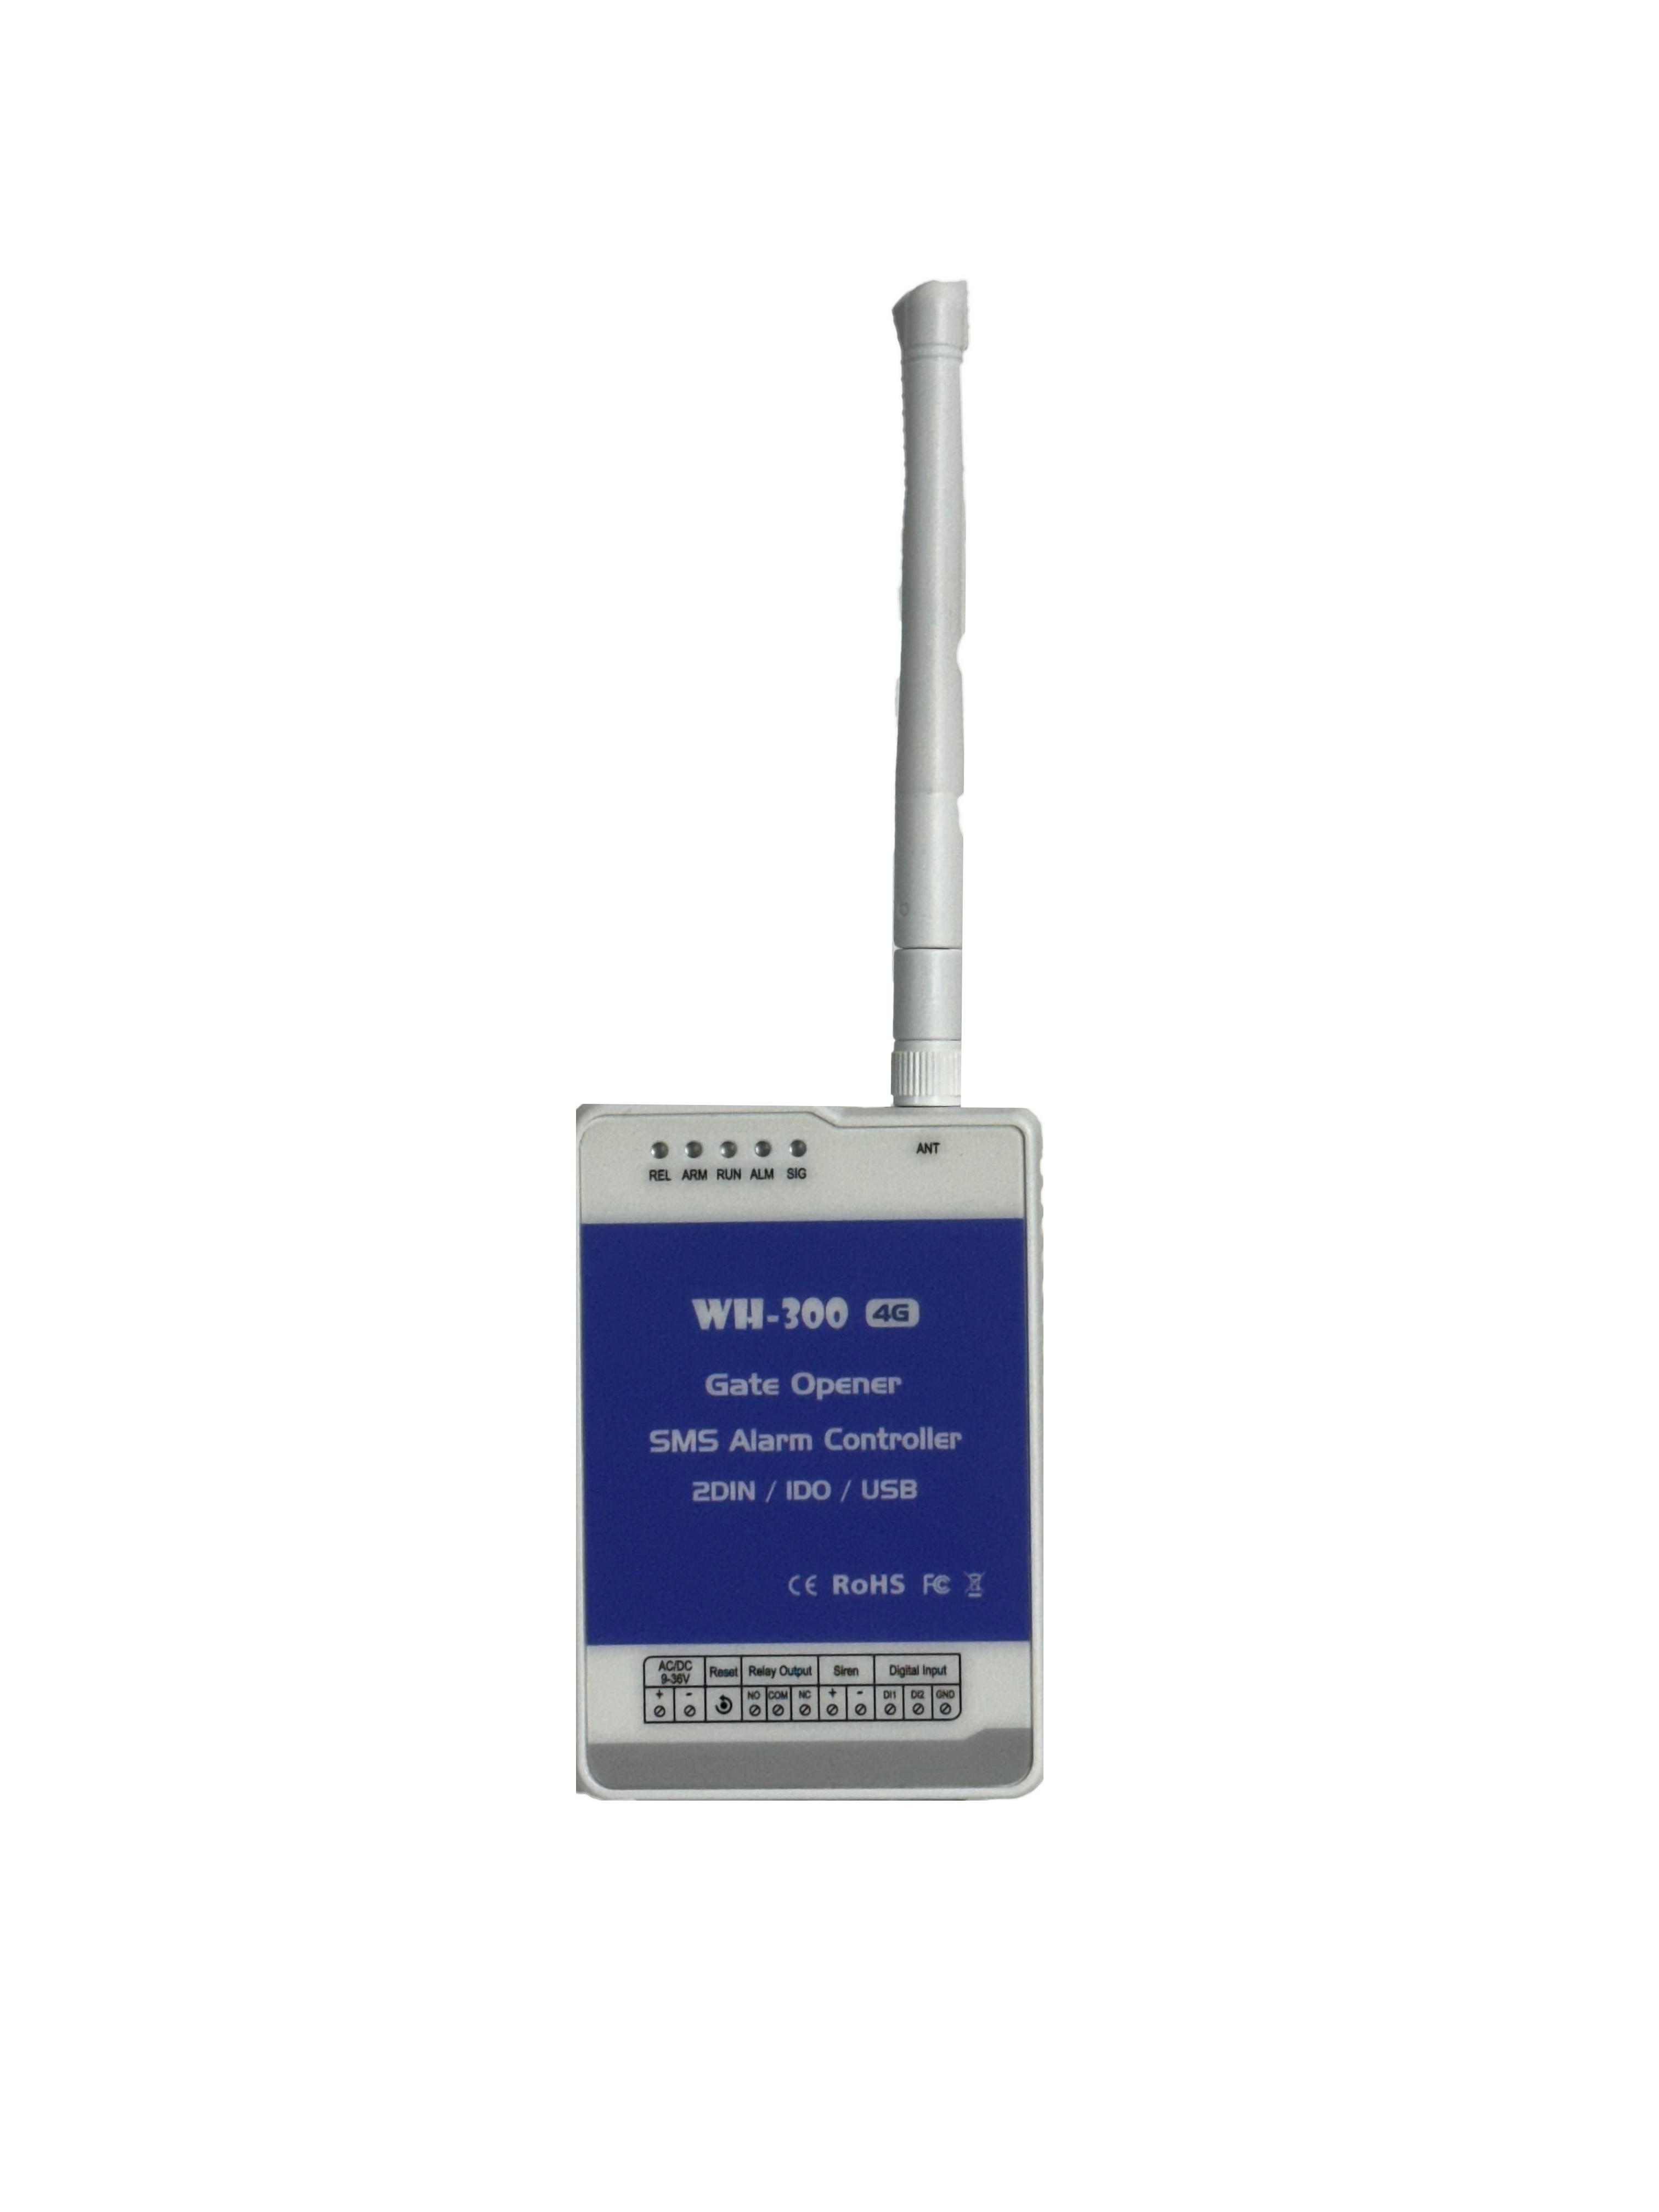 GSM 4G gate opener WH-300 4G